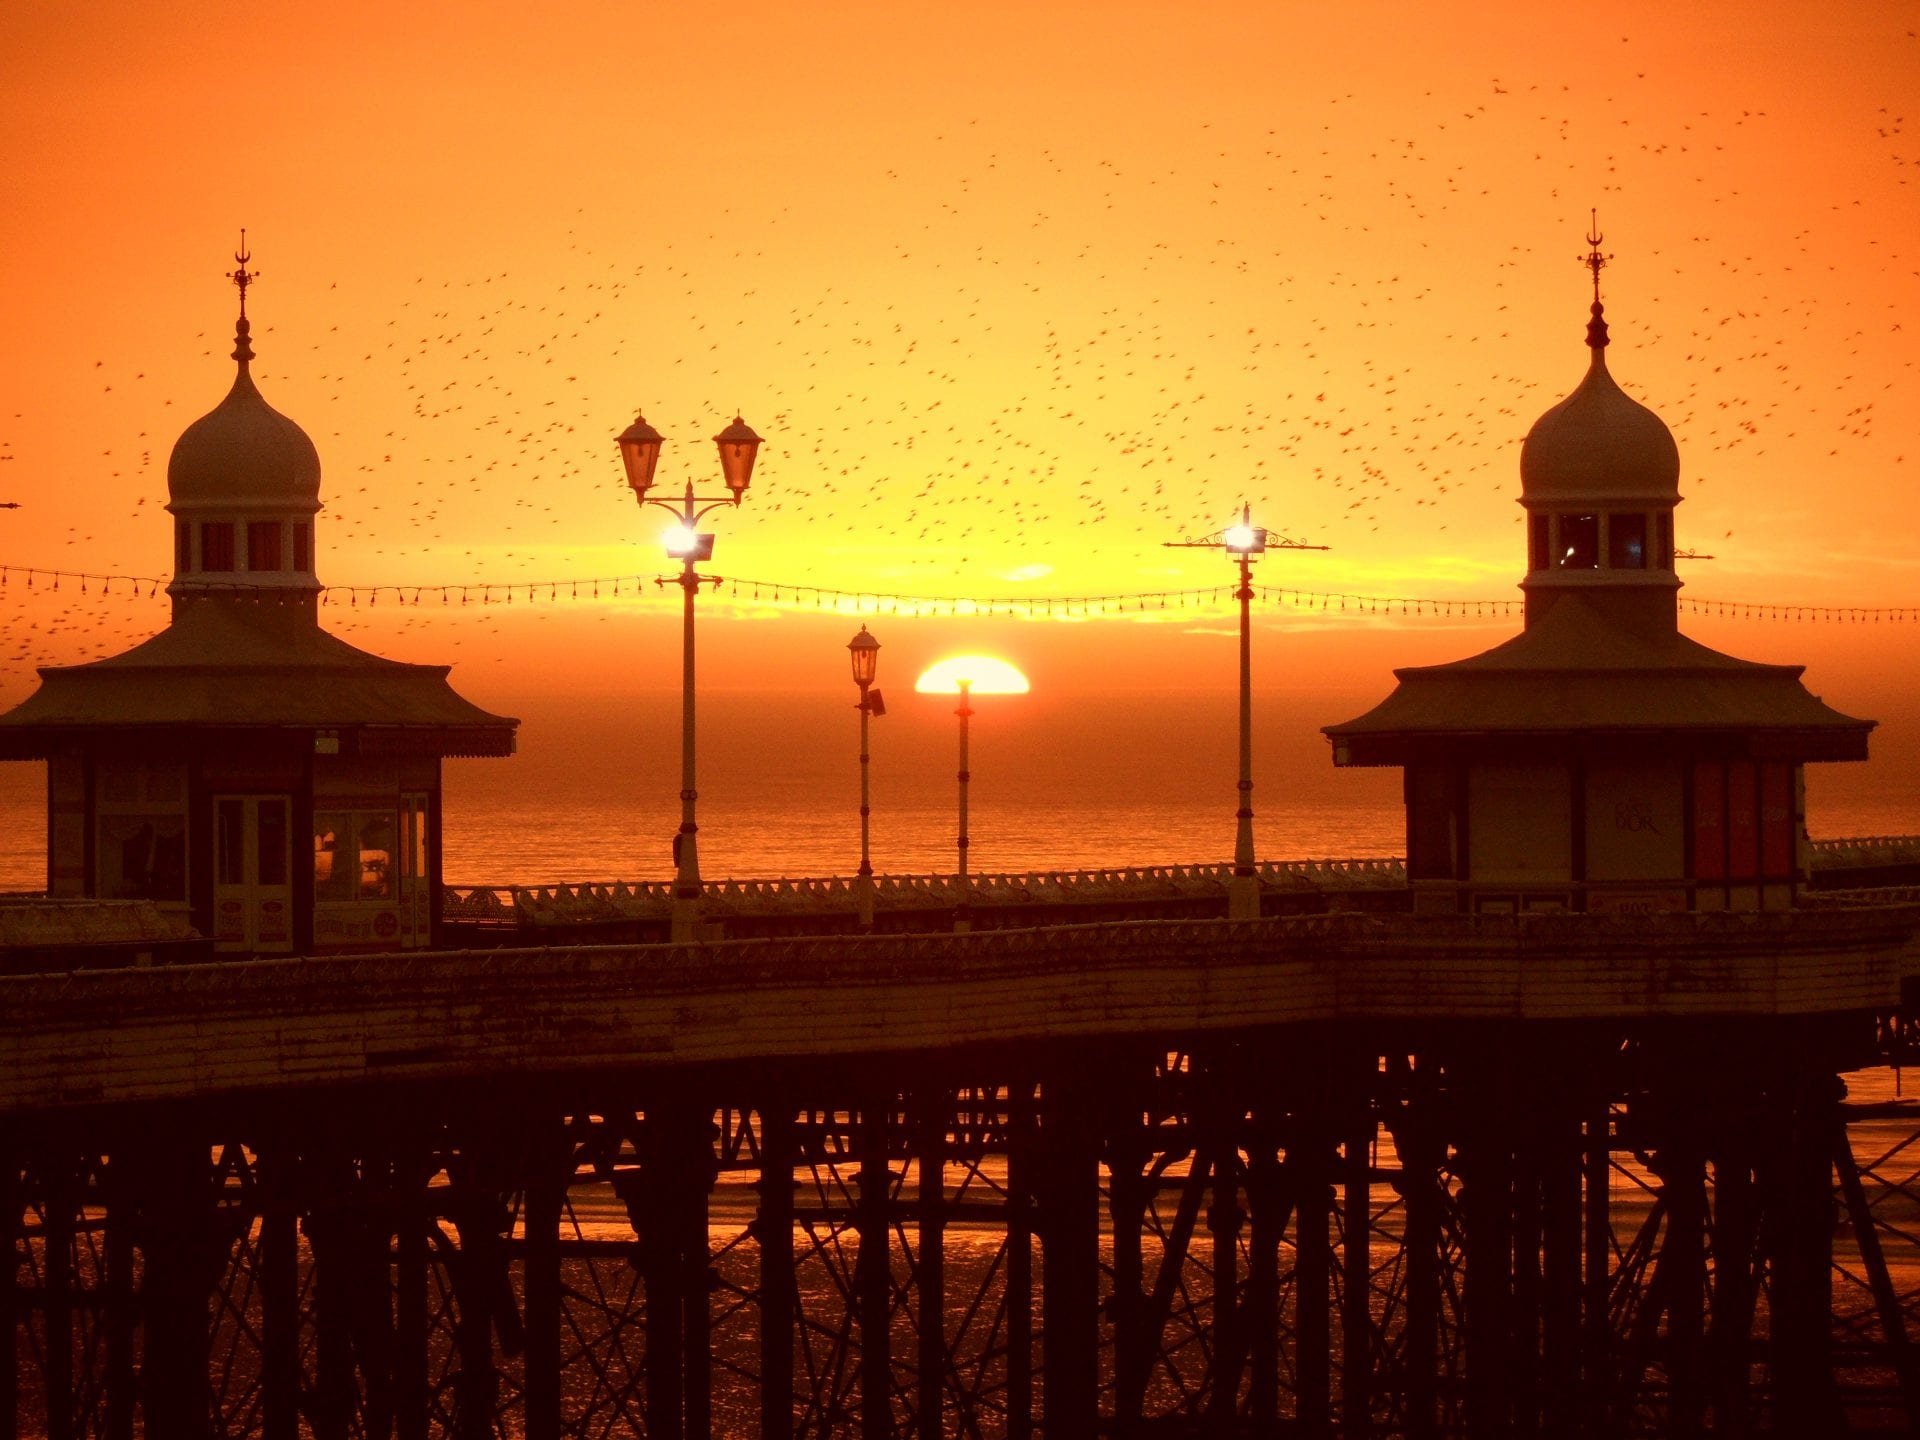 North Pier at sunset by Neil Curtis from Wolverhampton